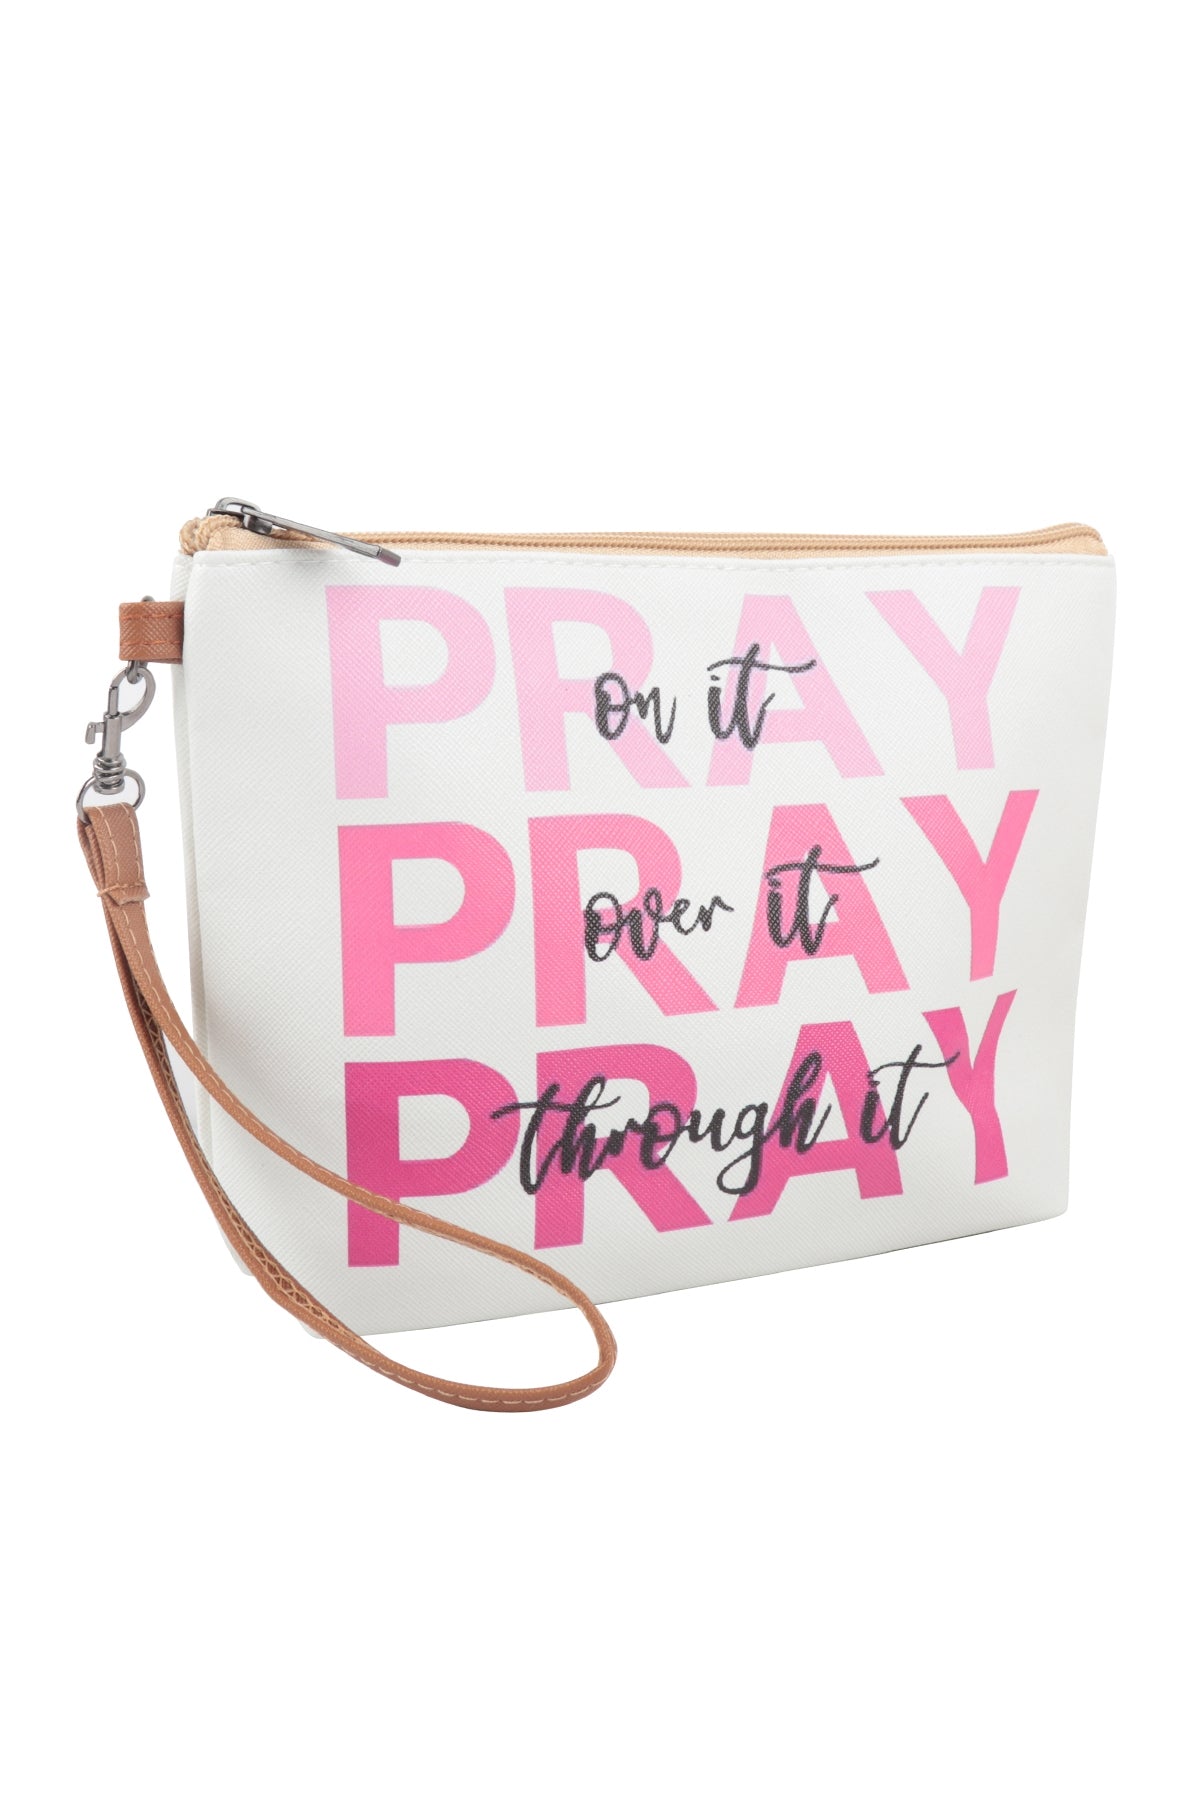 PRAY OVER ON THROUGH IT PRINT COSMETIC POUCH BAG W/ WRISTLET/6PCS